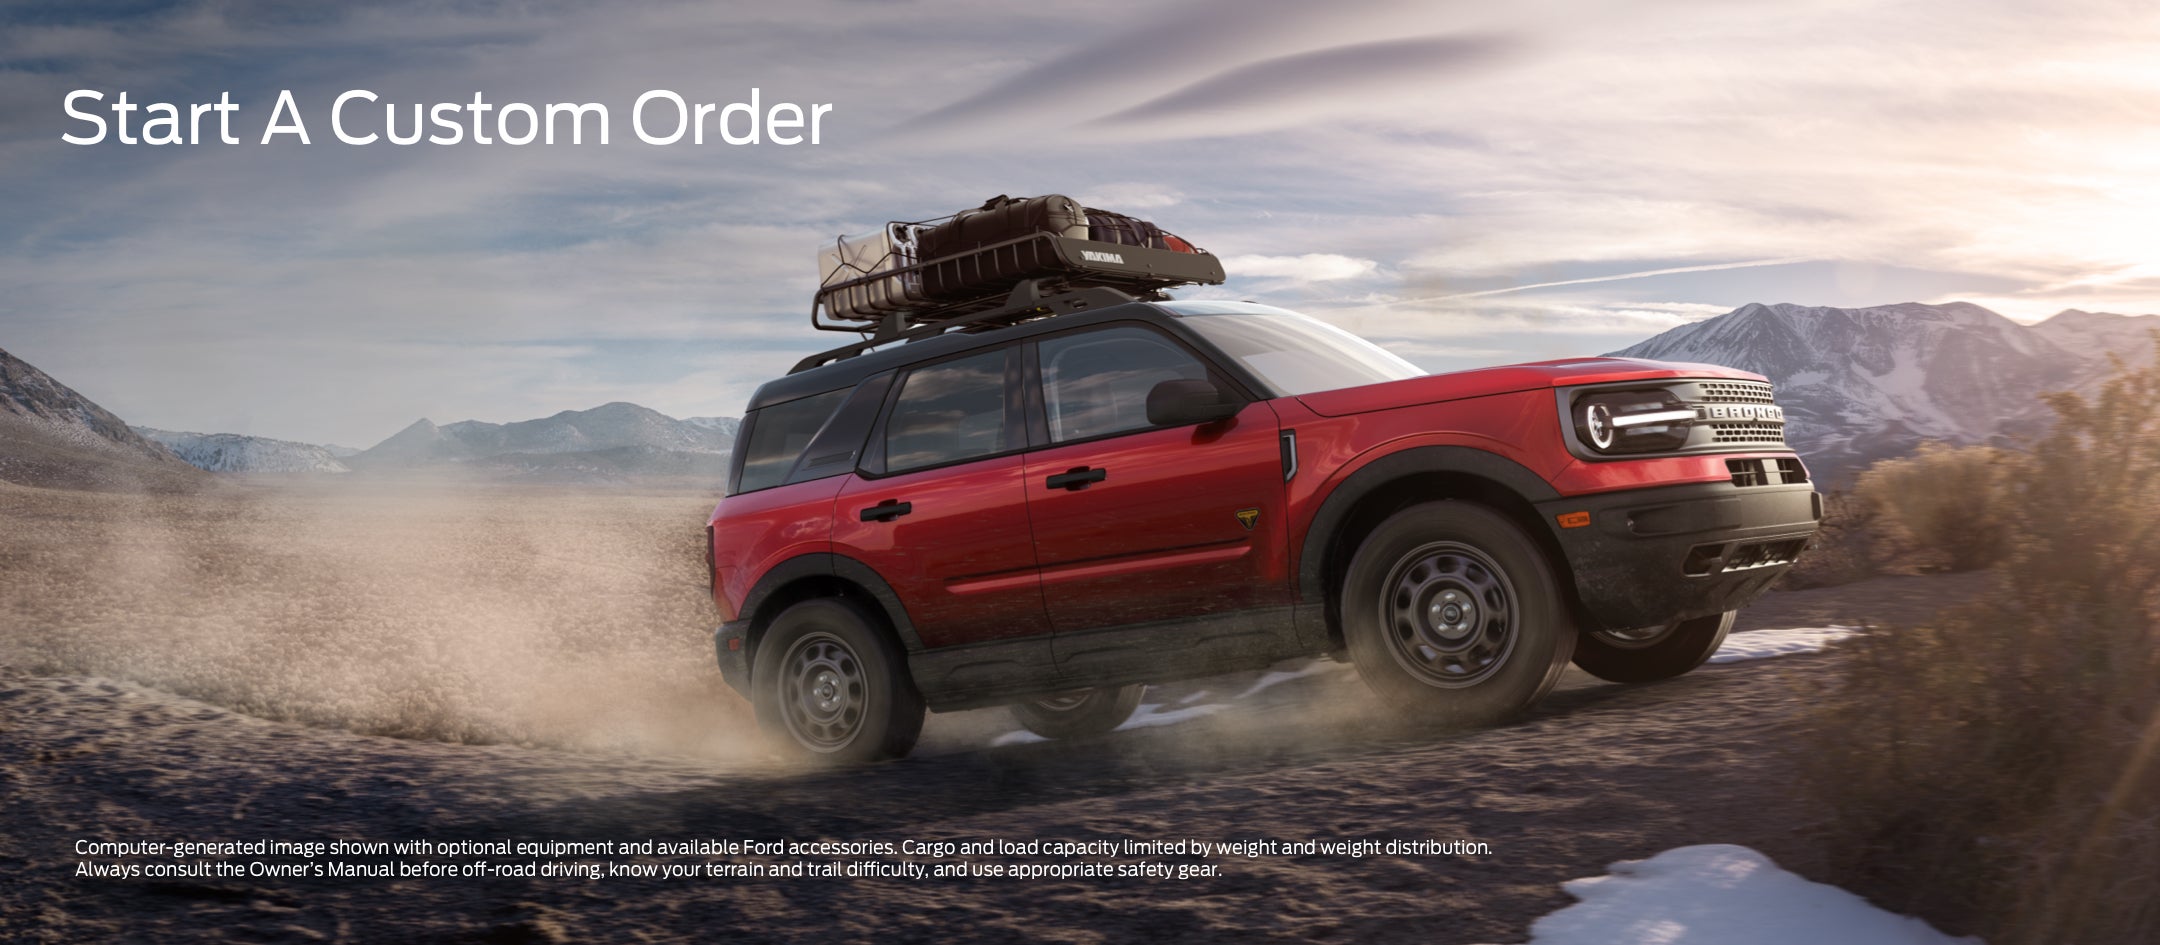 Start a custom order | Two Rivers Ford, LLC in Miles City MT